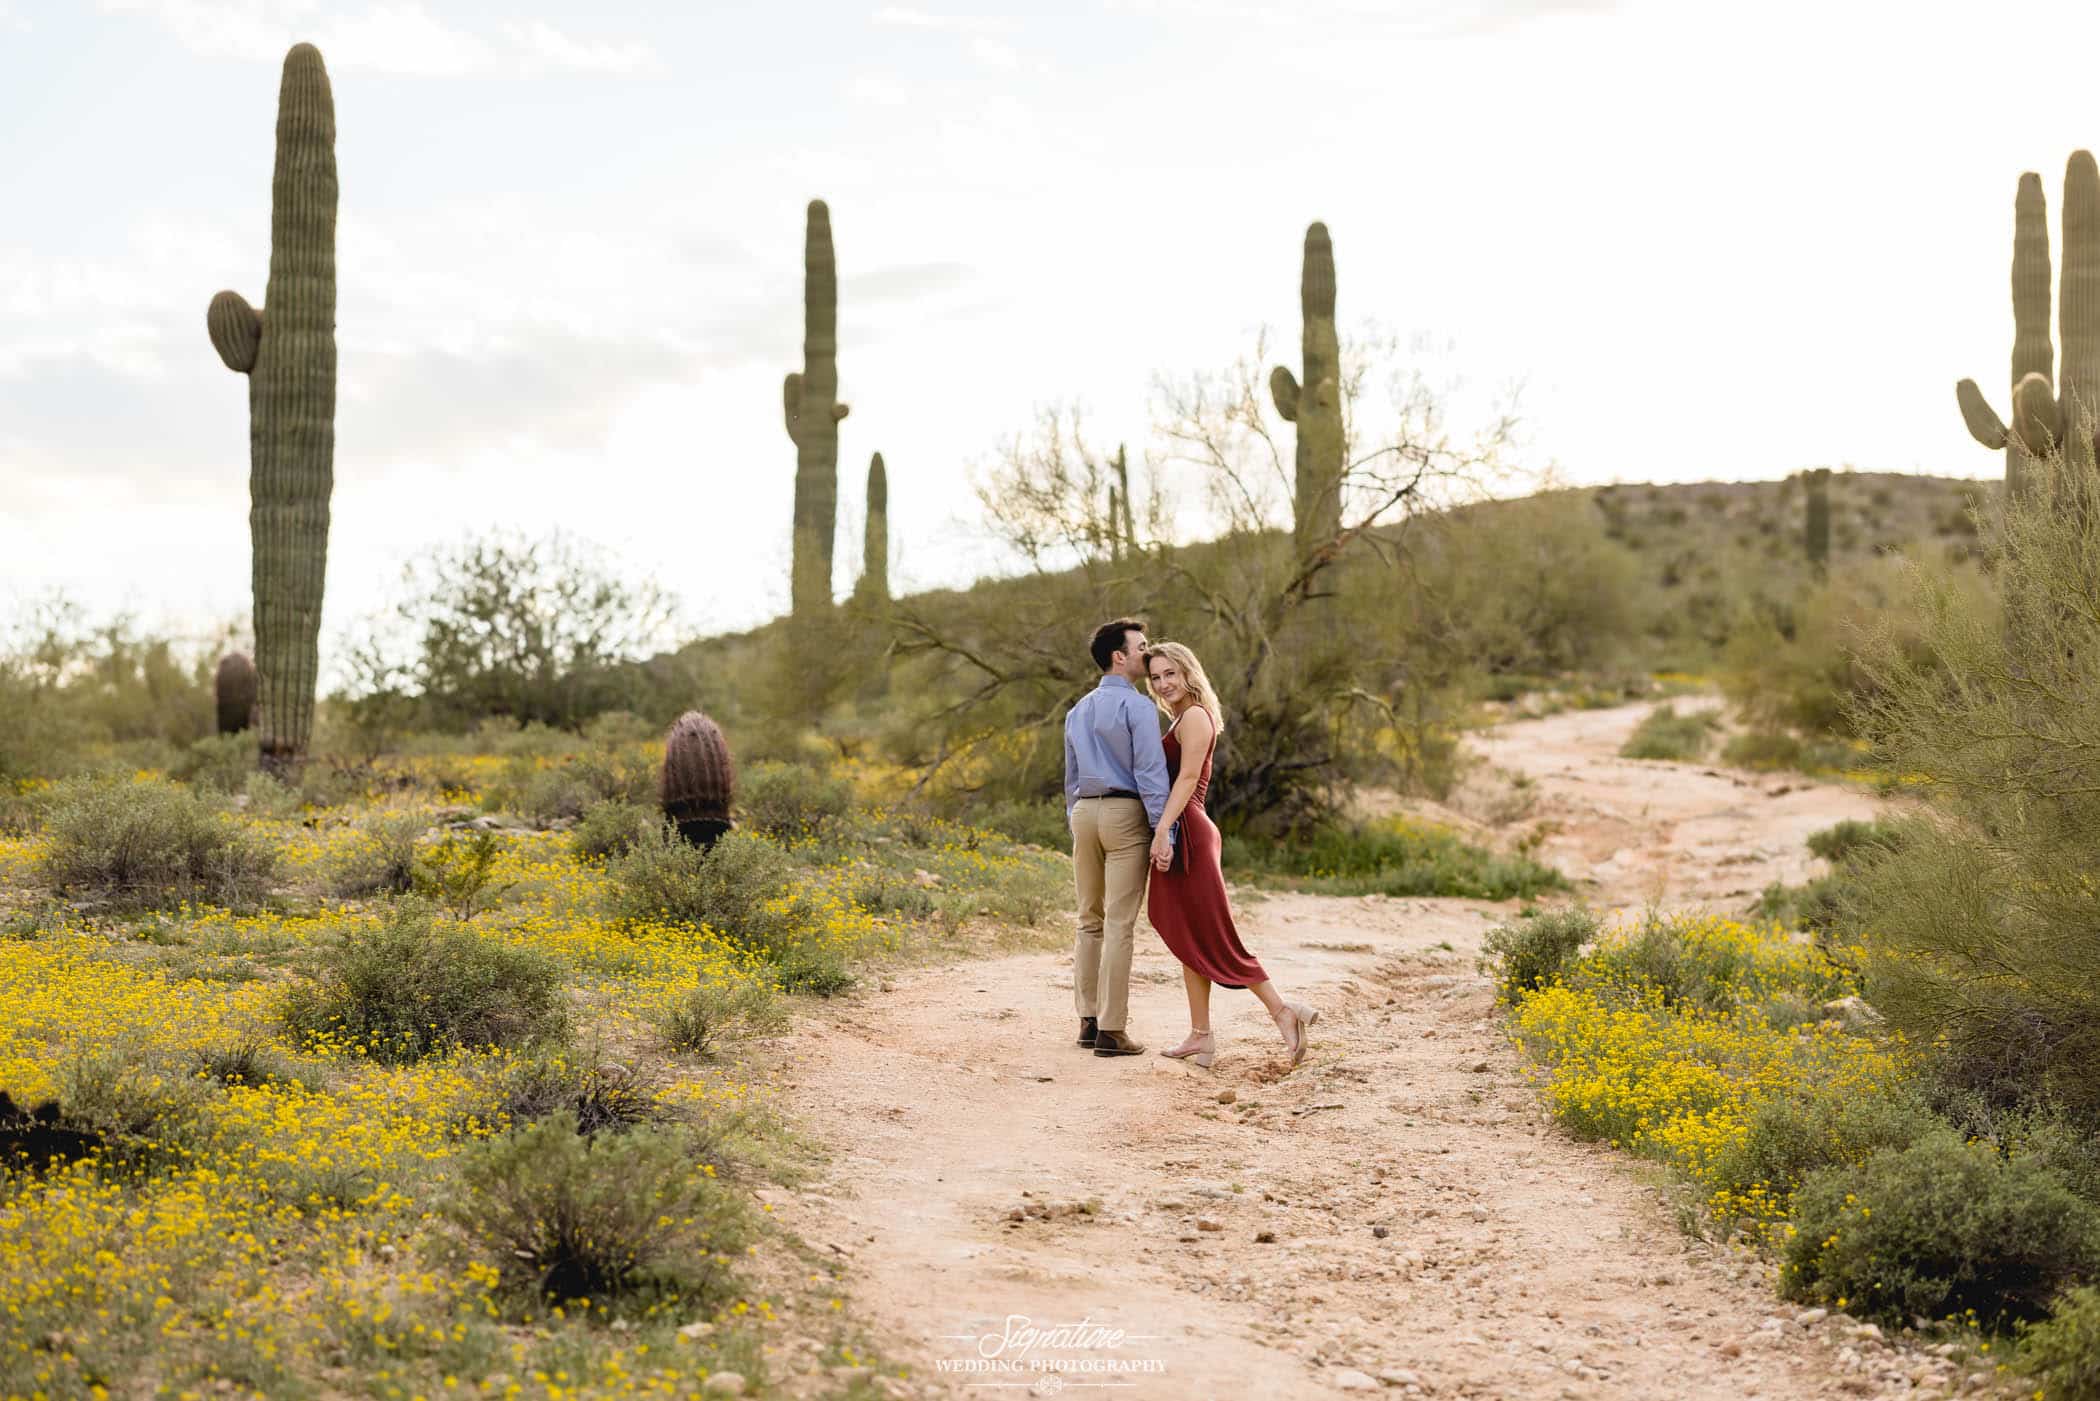 Couple holding hands posed on desert path